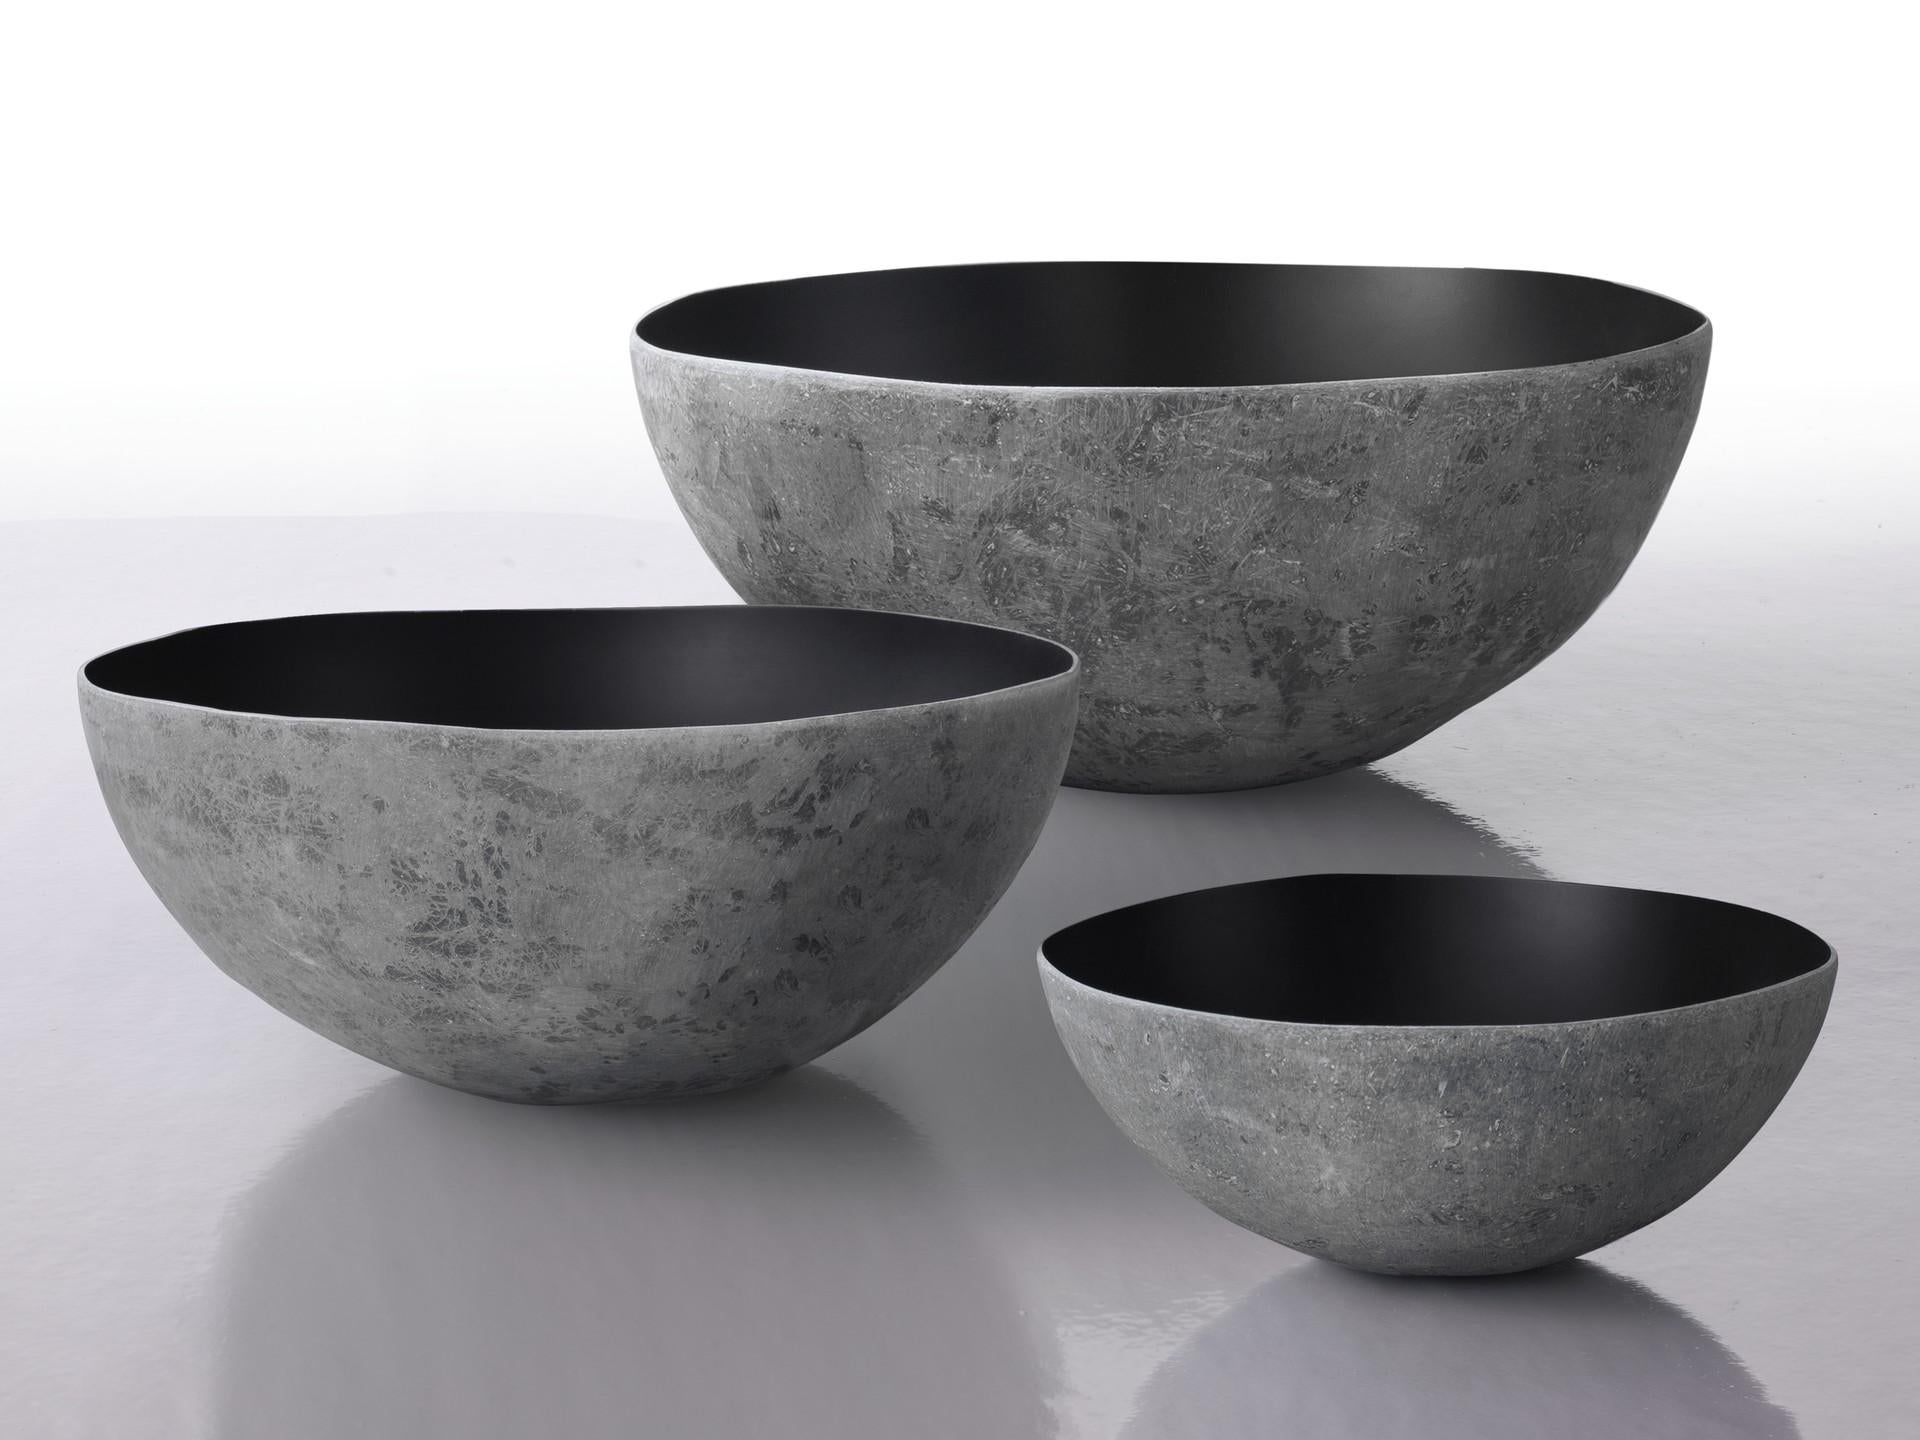 Set of 3 stille bowls by Imperfettolab
Dimensions: 
Ø36 x H 27 cm
Ø28 x H 13 cm
Ø20 x H 9 cm
Materials: Fiberglass

Imperfetto Lab
Who we are ? We are a family.
Verter Turroni, Emanuela Ravelli and our children Elia, Margherita and